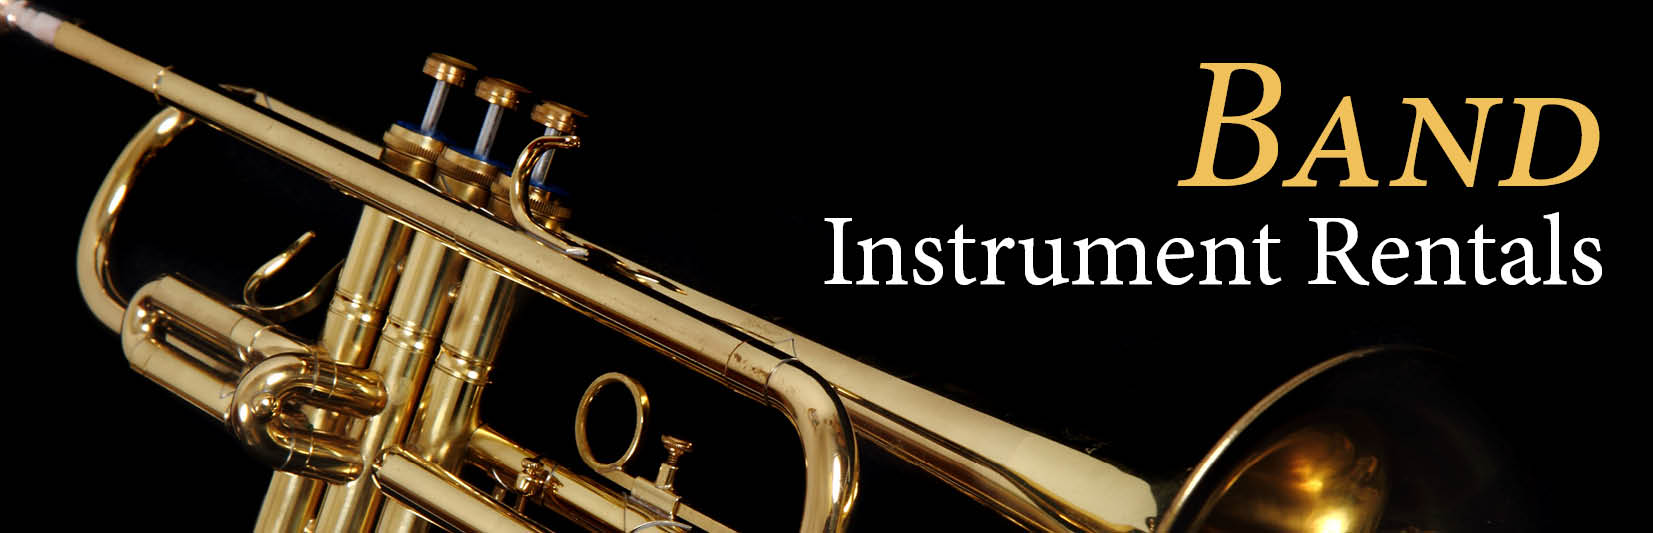 Band instrument rentals from The Music Shoppe